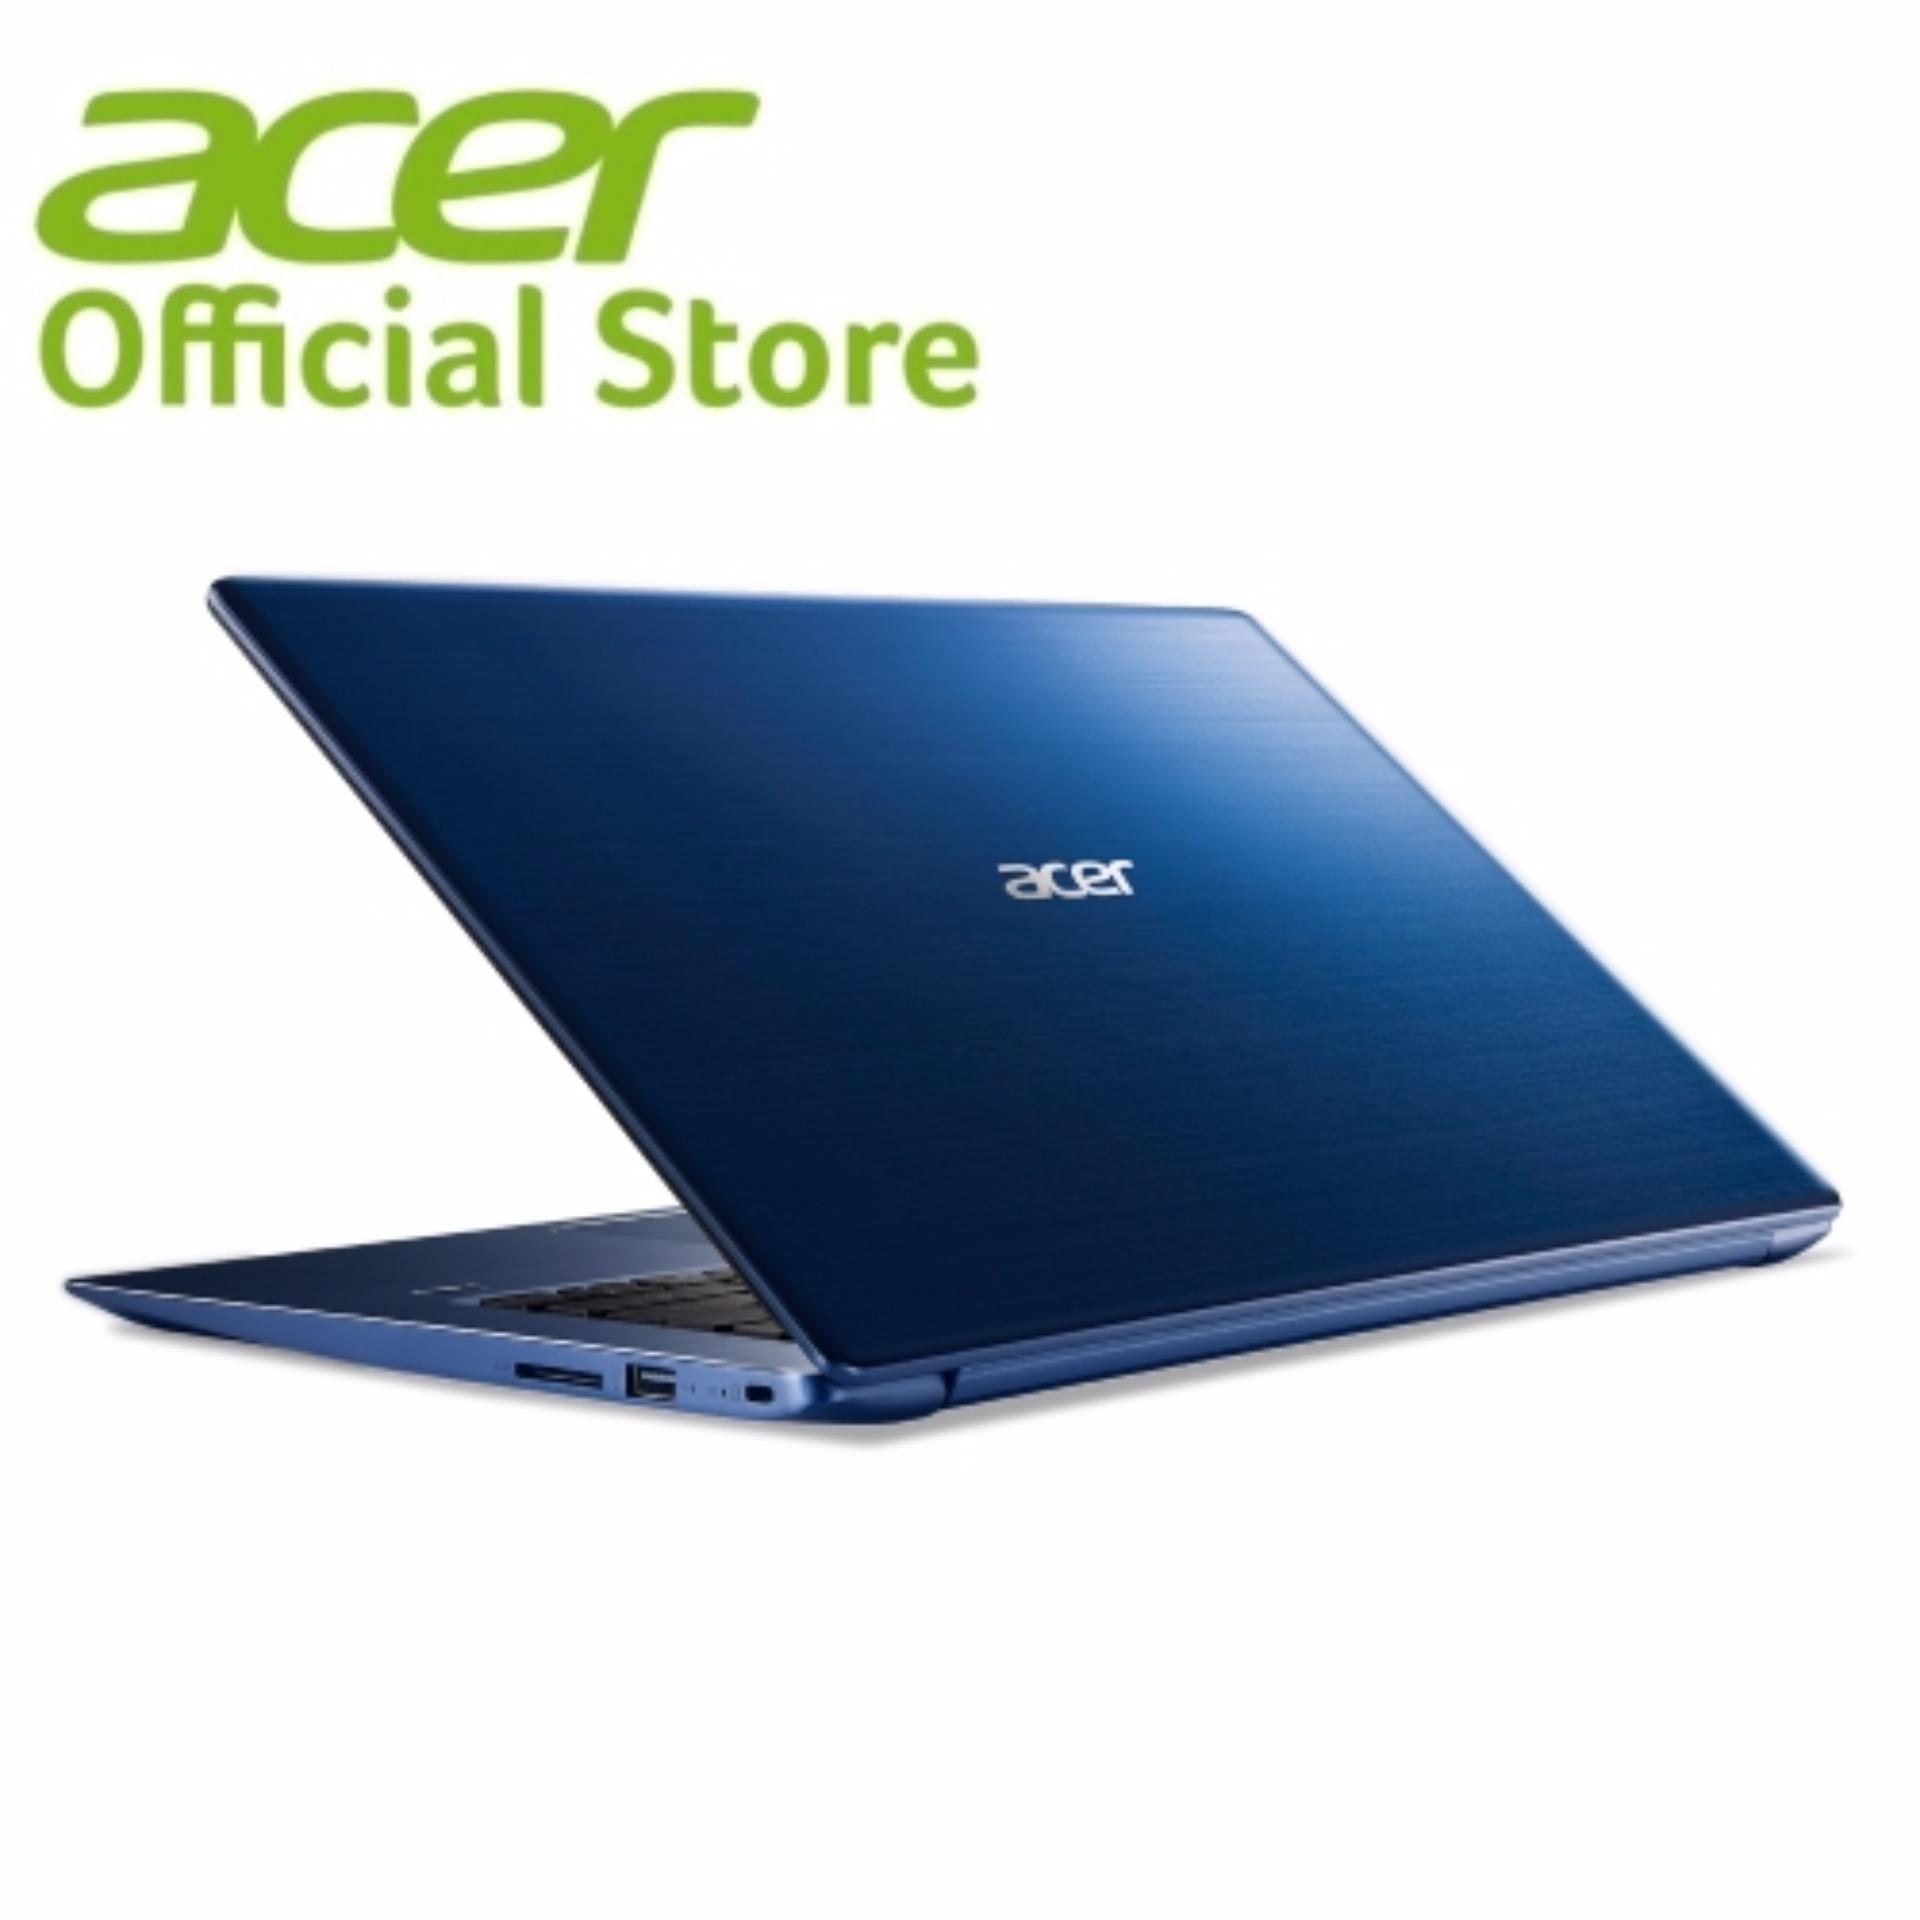 Acer Swift 3 Swift SF314-52G-88QH Thin & Light Laptop (Blue) - 8th Generation i7 Processor with Nvidia MX150 Graphics Card